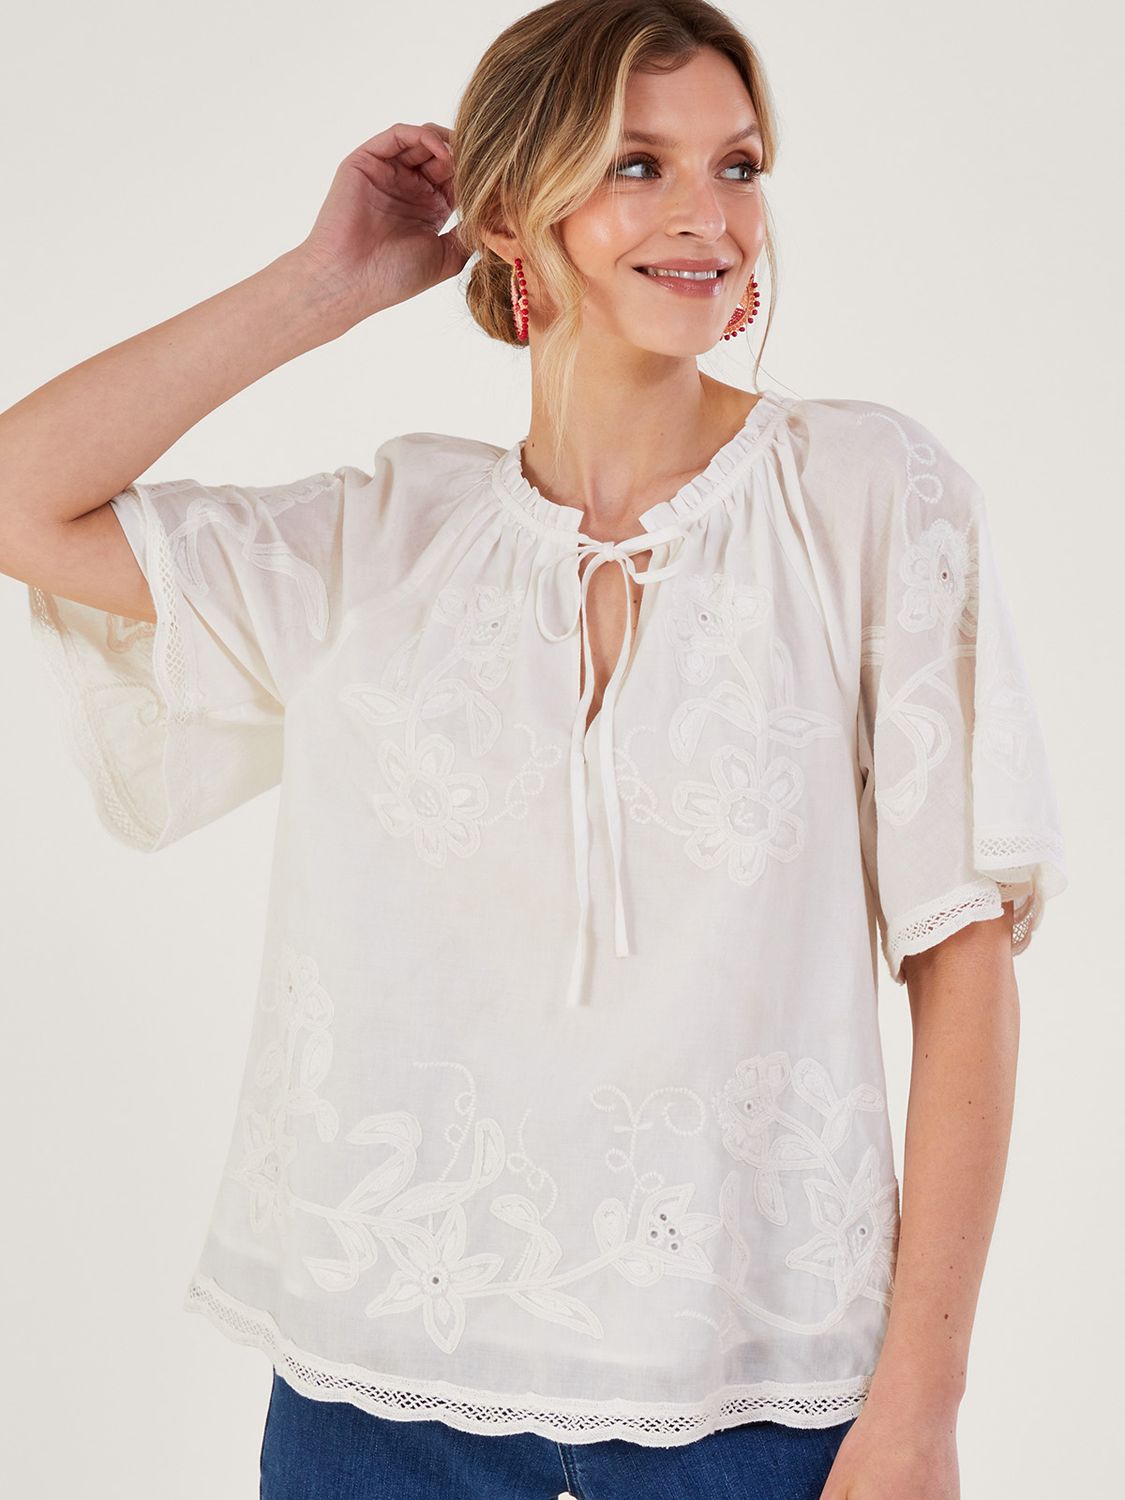 Monsoon Embroidered Short Sleeve Top, White